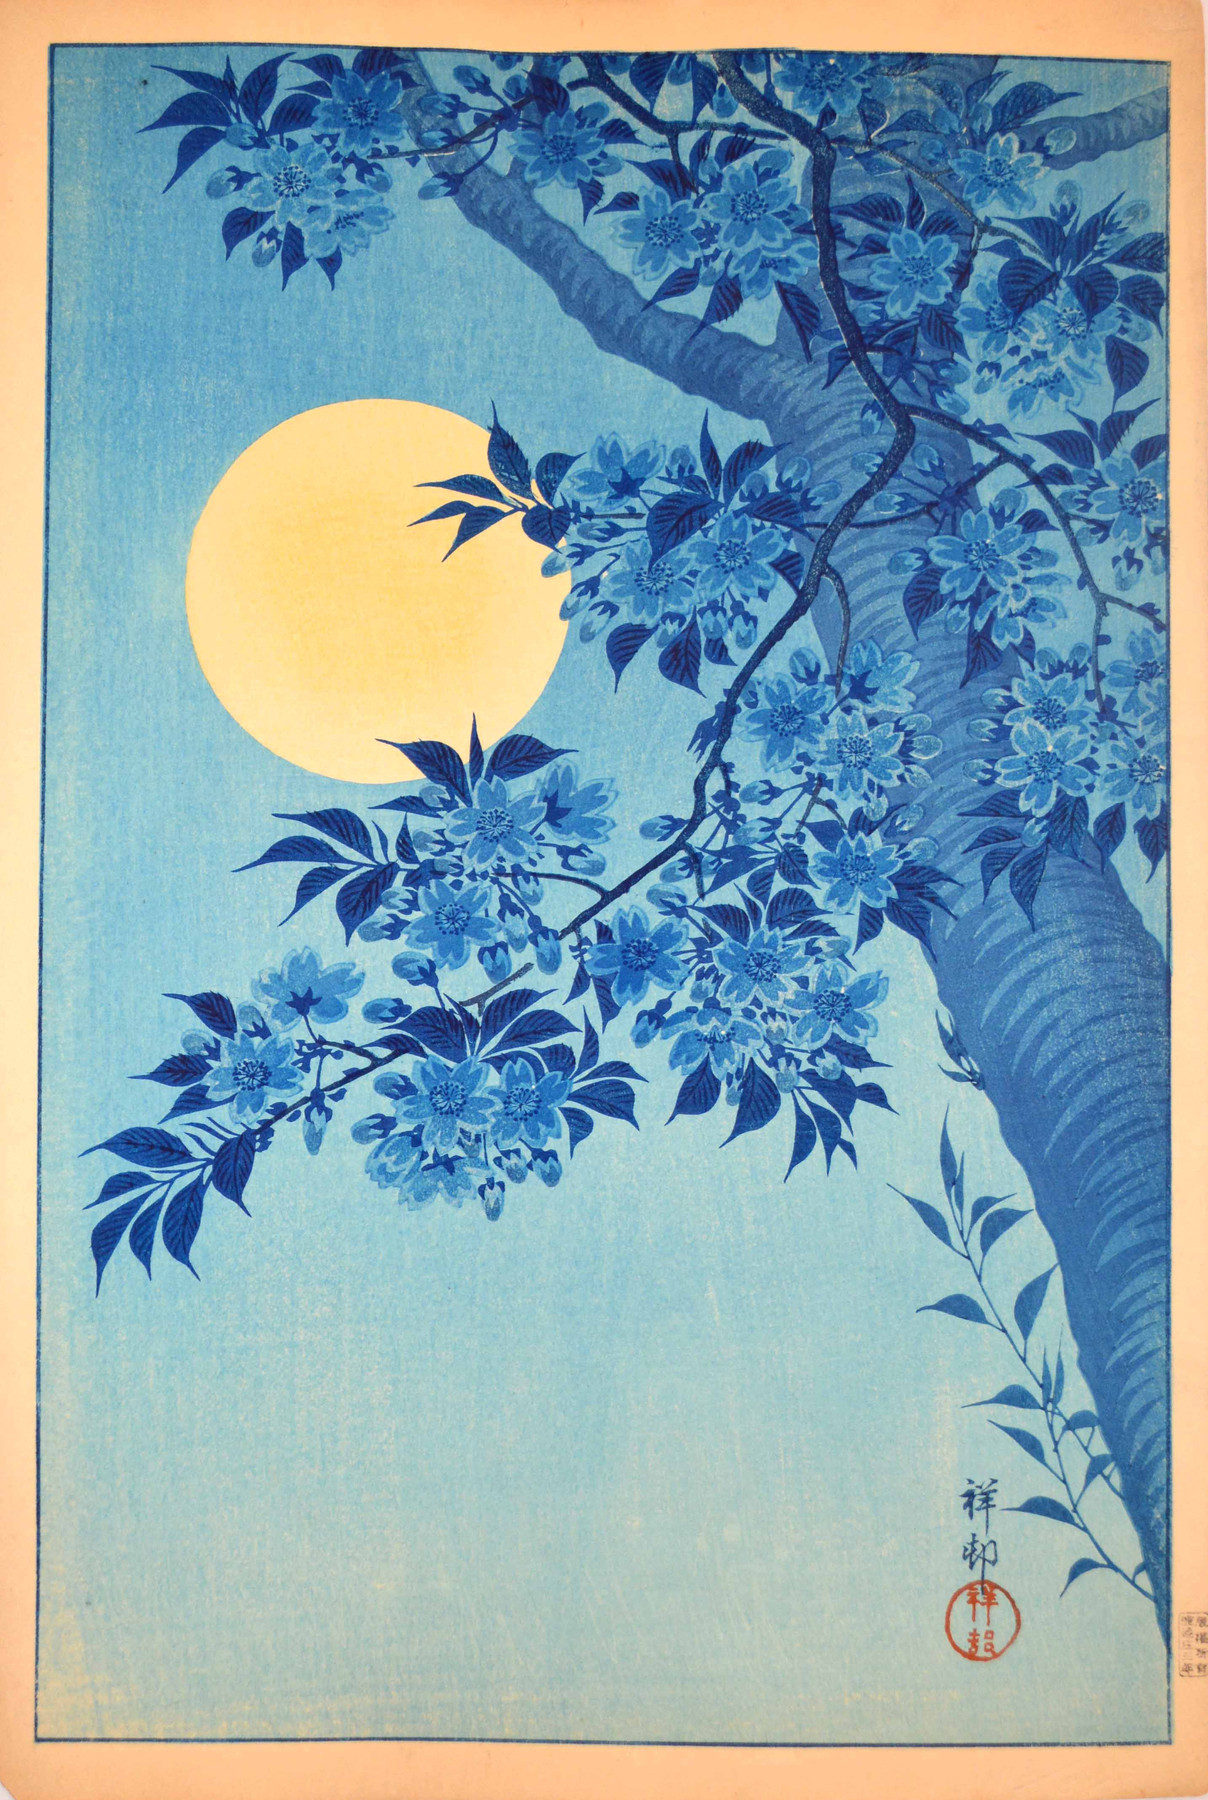 Cherry Blossom and Full Moon by Ohara Koson - 1932 - 26 x 39 cm private collection